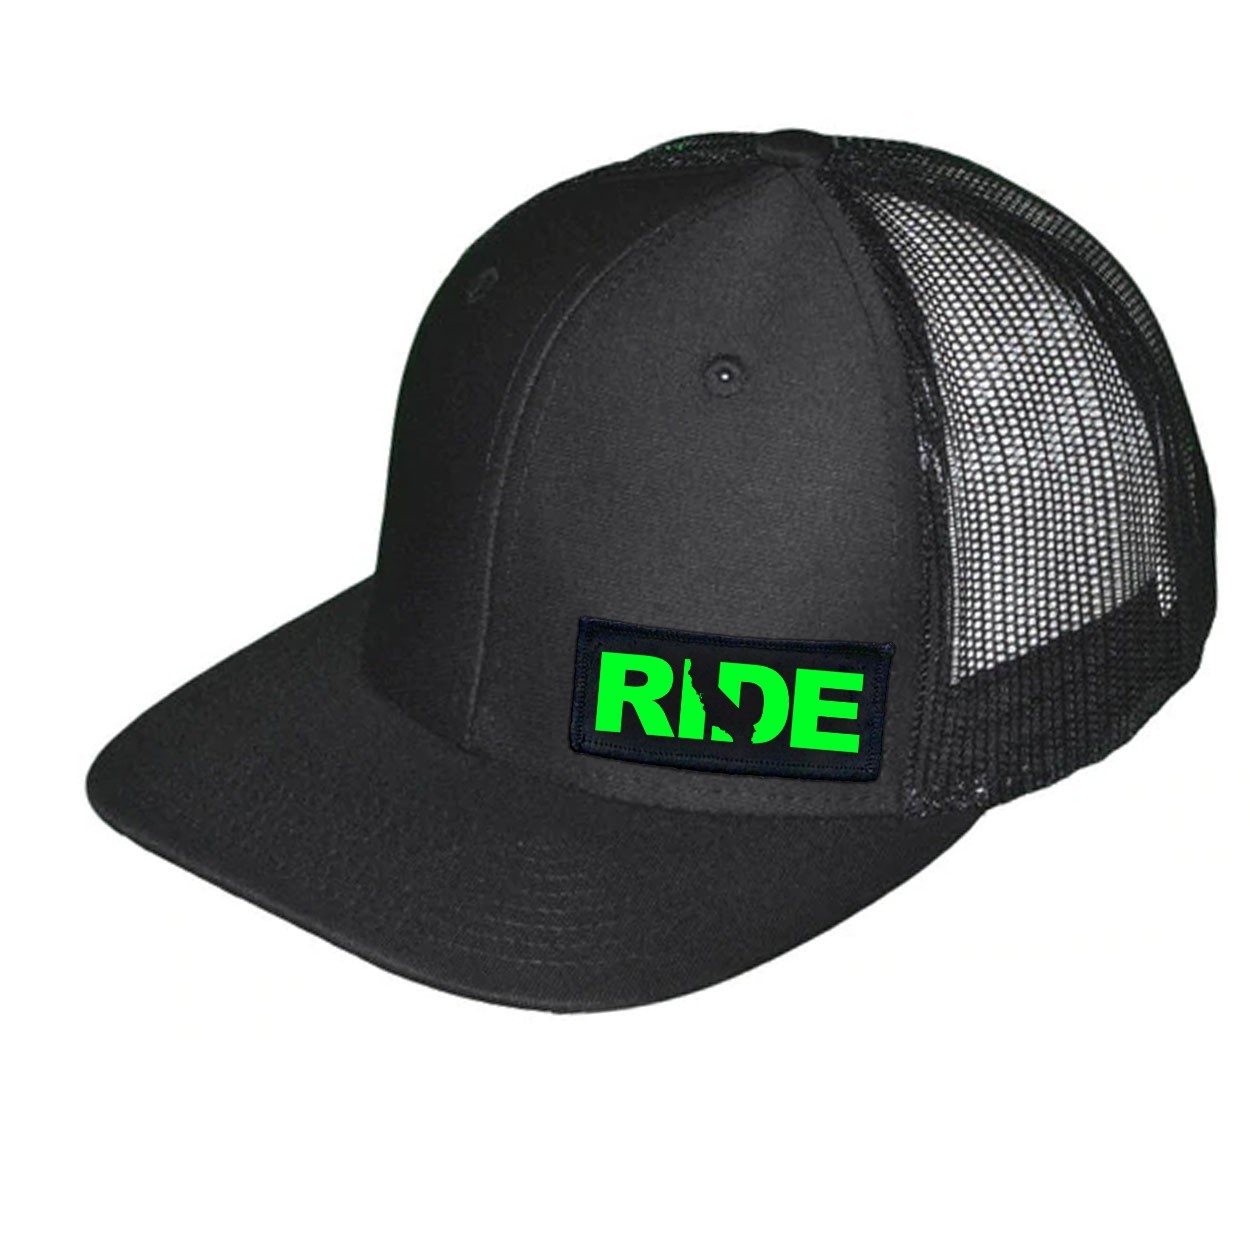 Ride California Night Out Woven Patch Snapback Trucker Hat Black (Green Logo)